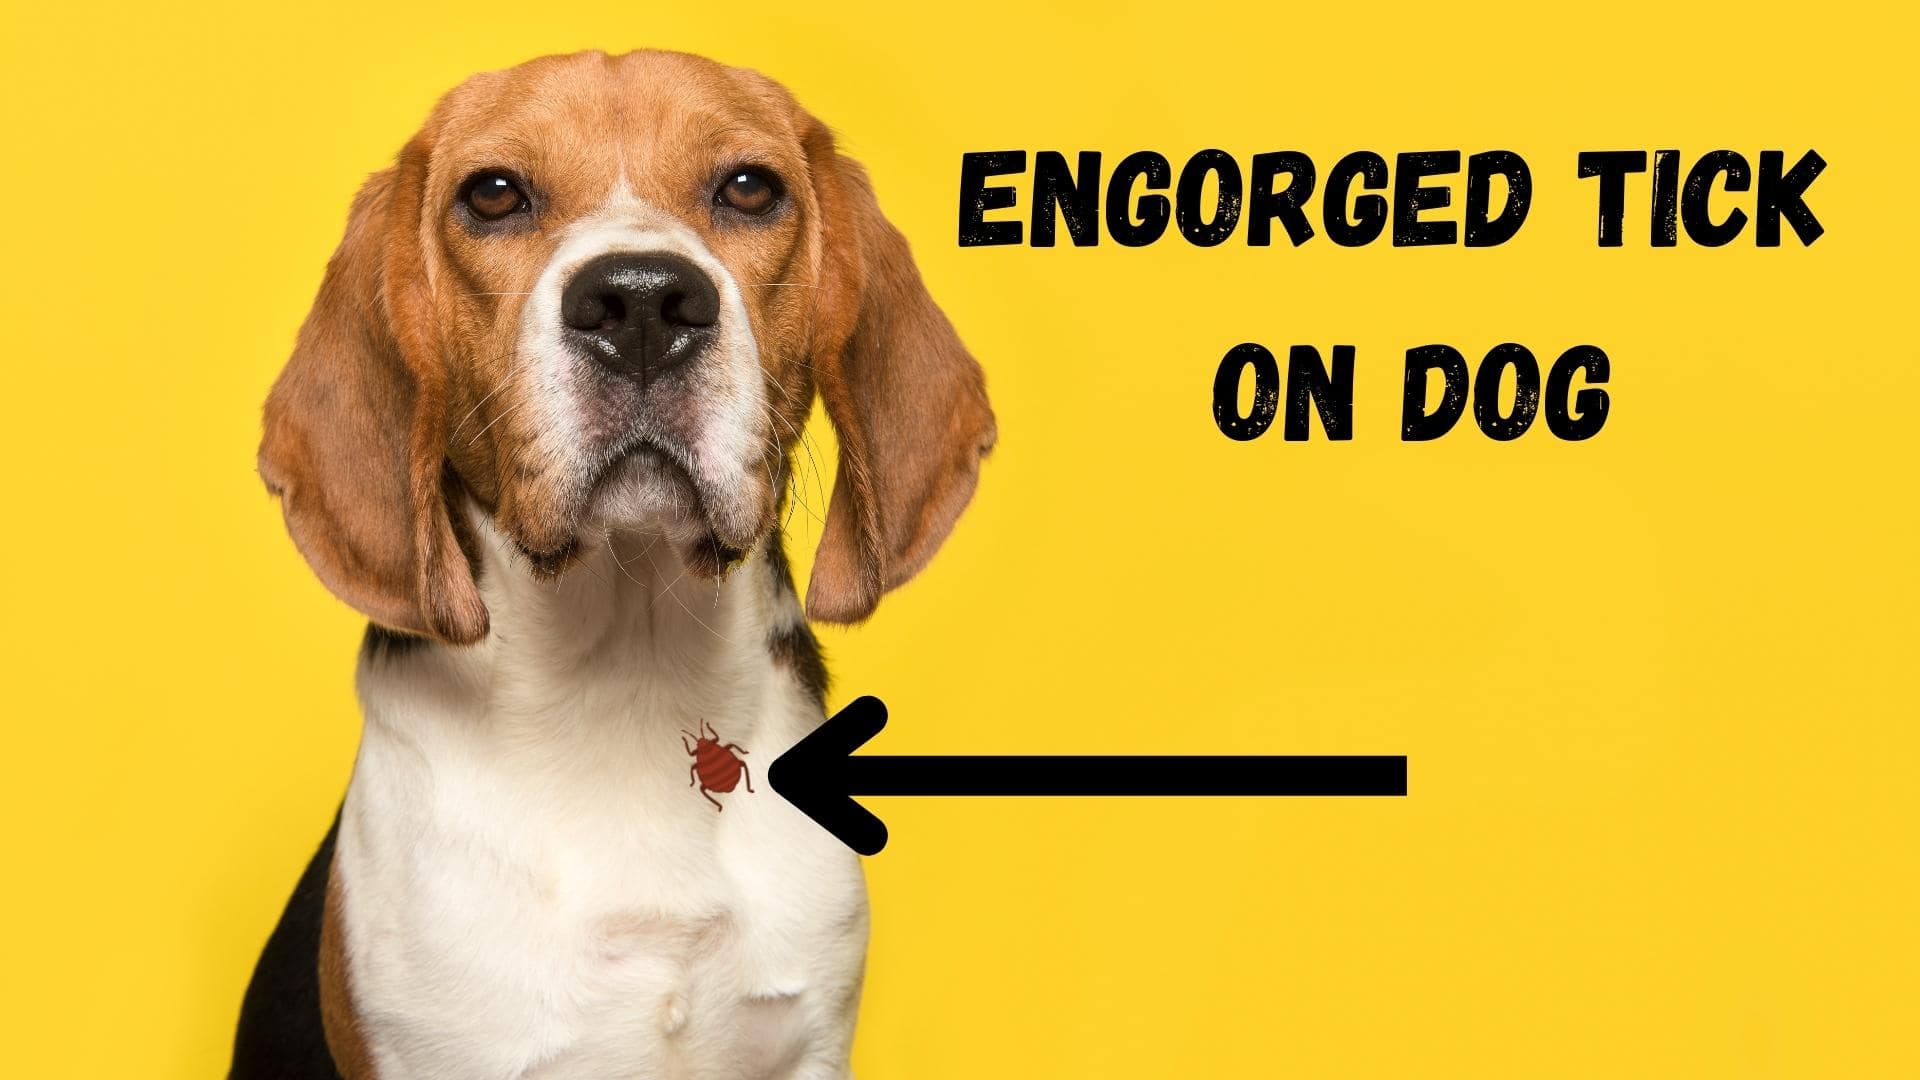 Engorged Tick On Dog | What To Do & How To Safely Remove It